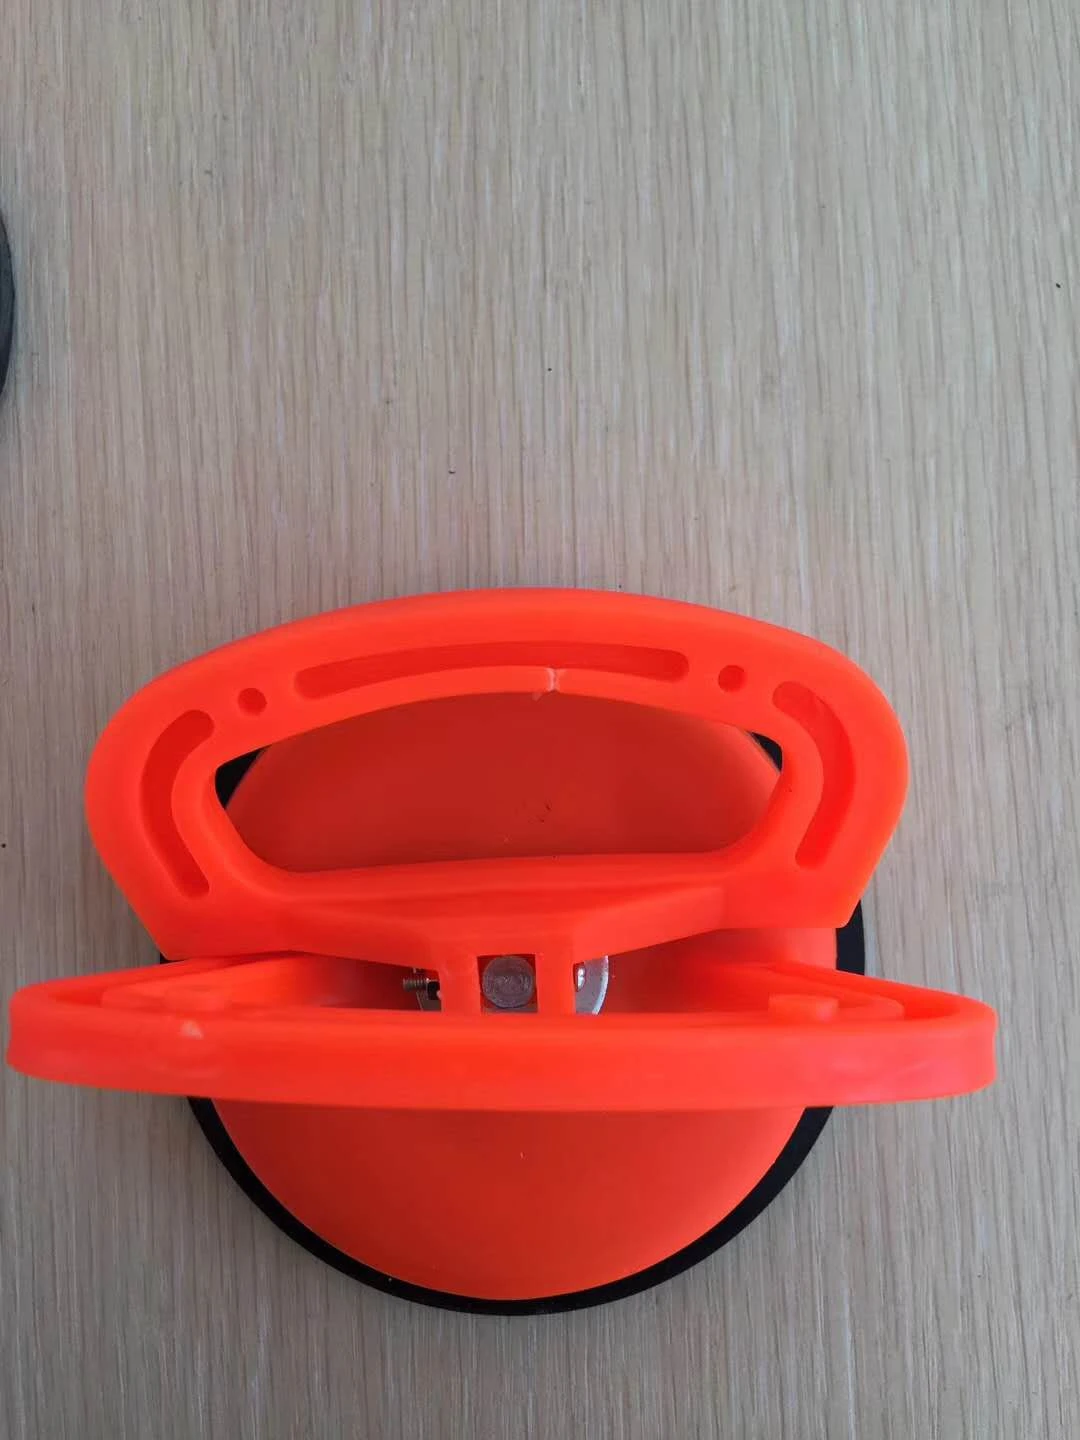 High quality tile single pump glass vacuum handle suction cup lifter